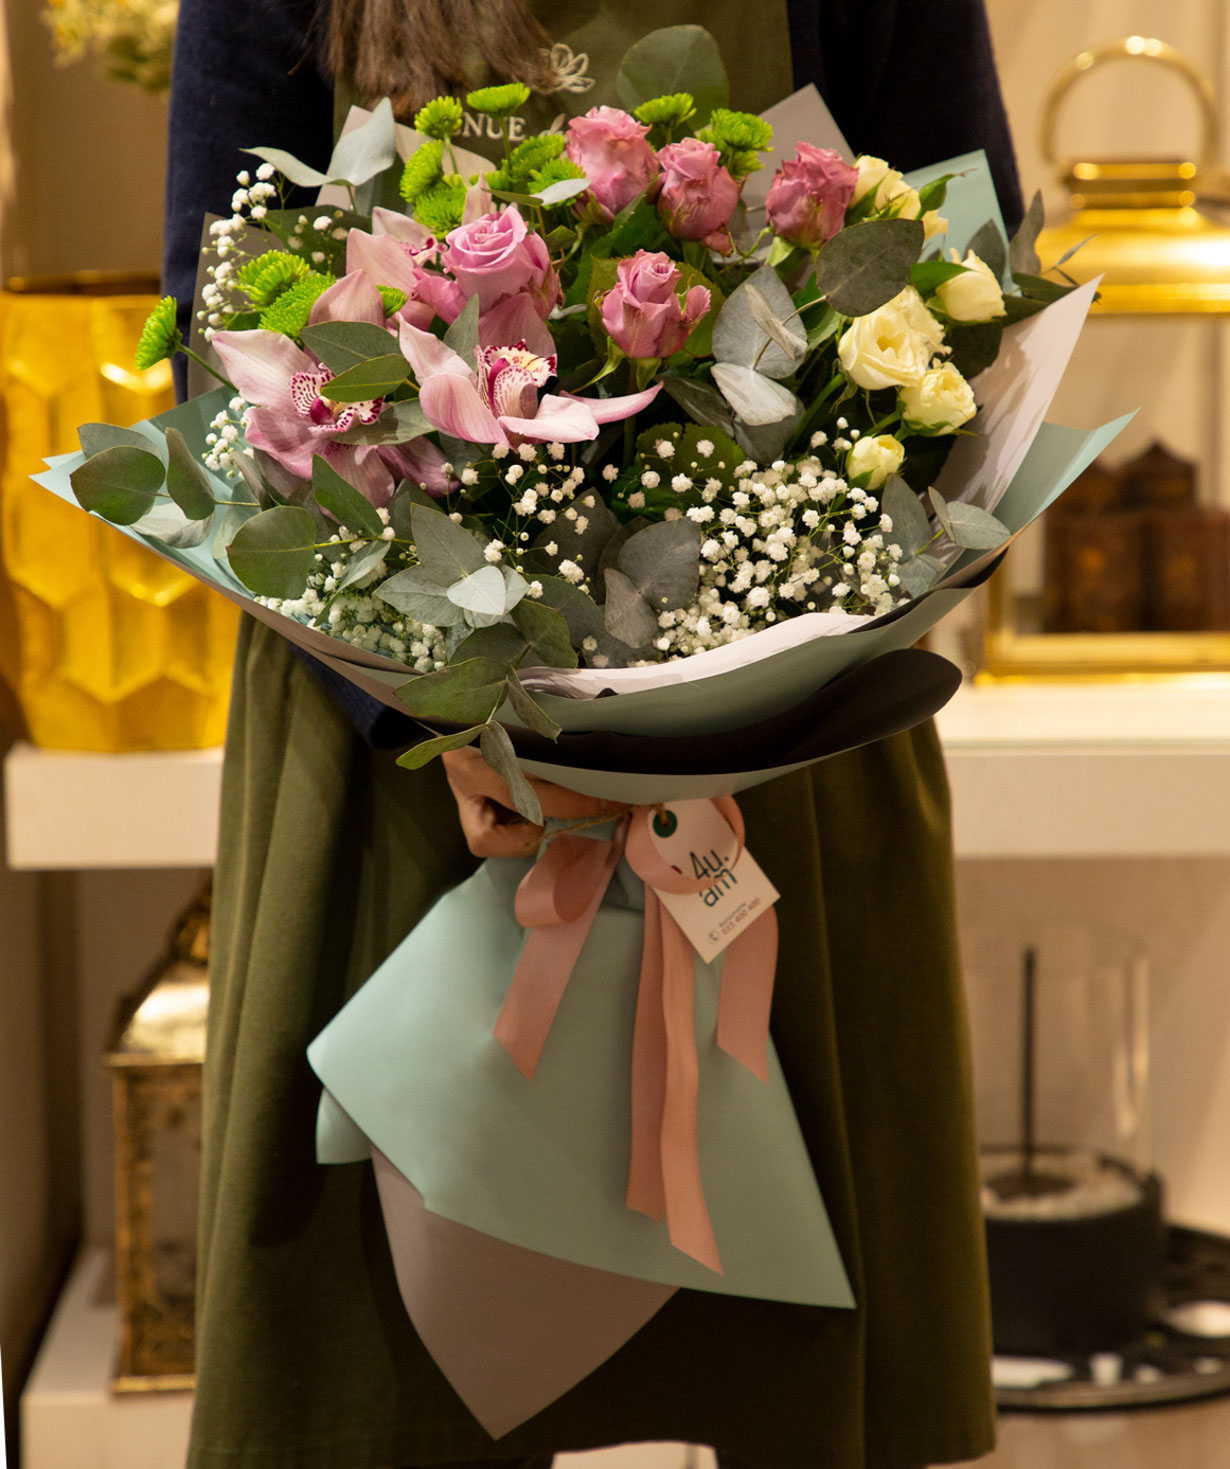 Bouquet `Litia` with roses, chrysanthemums and altromerias